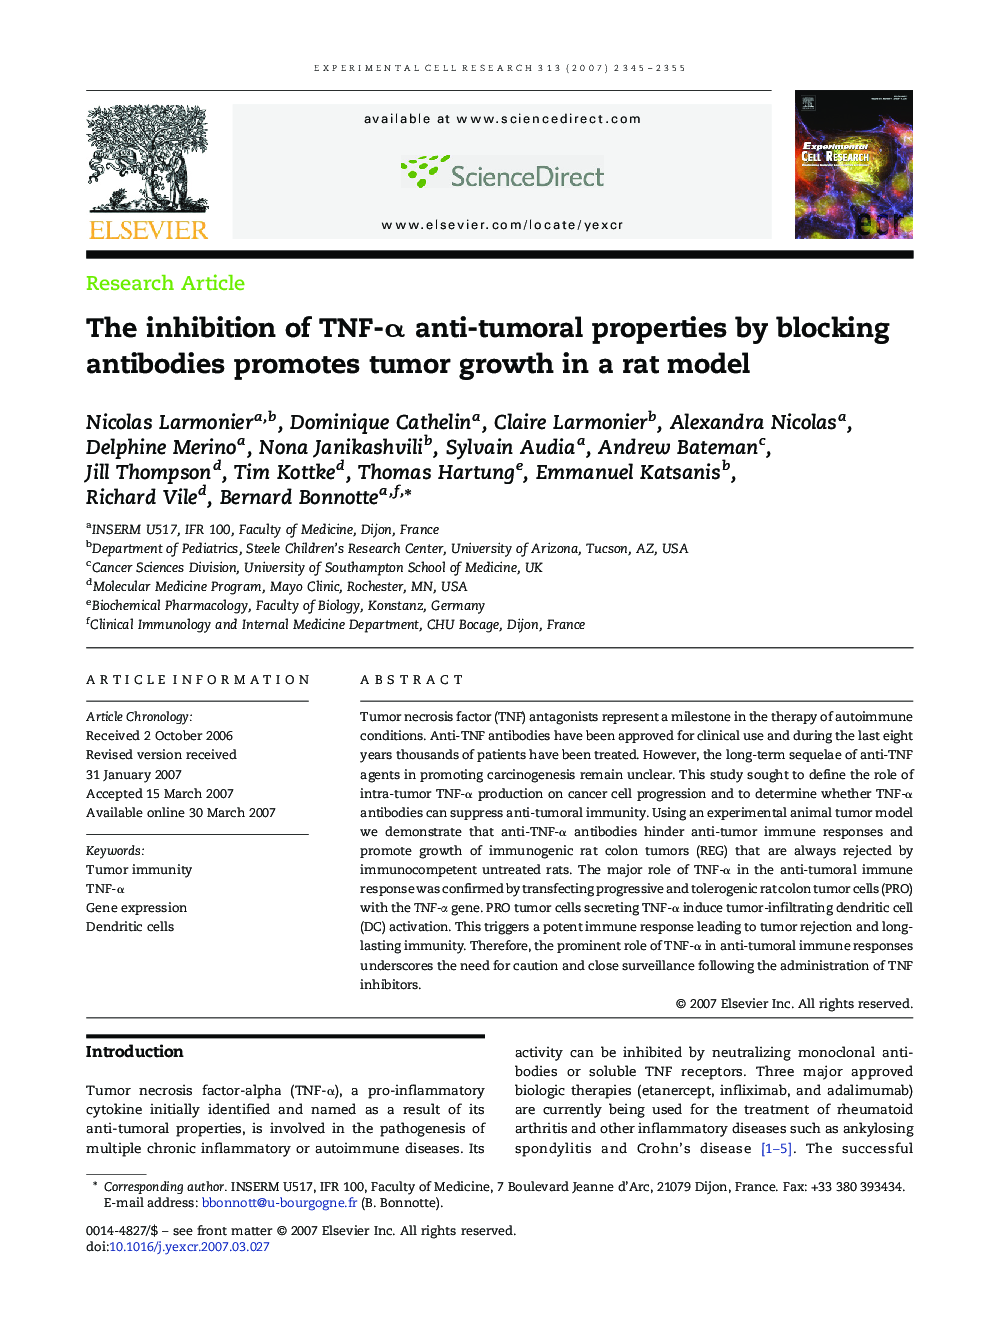 The inhibition of TNF-α anti-tumoral properties by blocking antibodies promotes tumor growth in a rat model